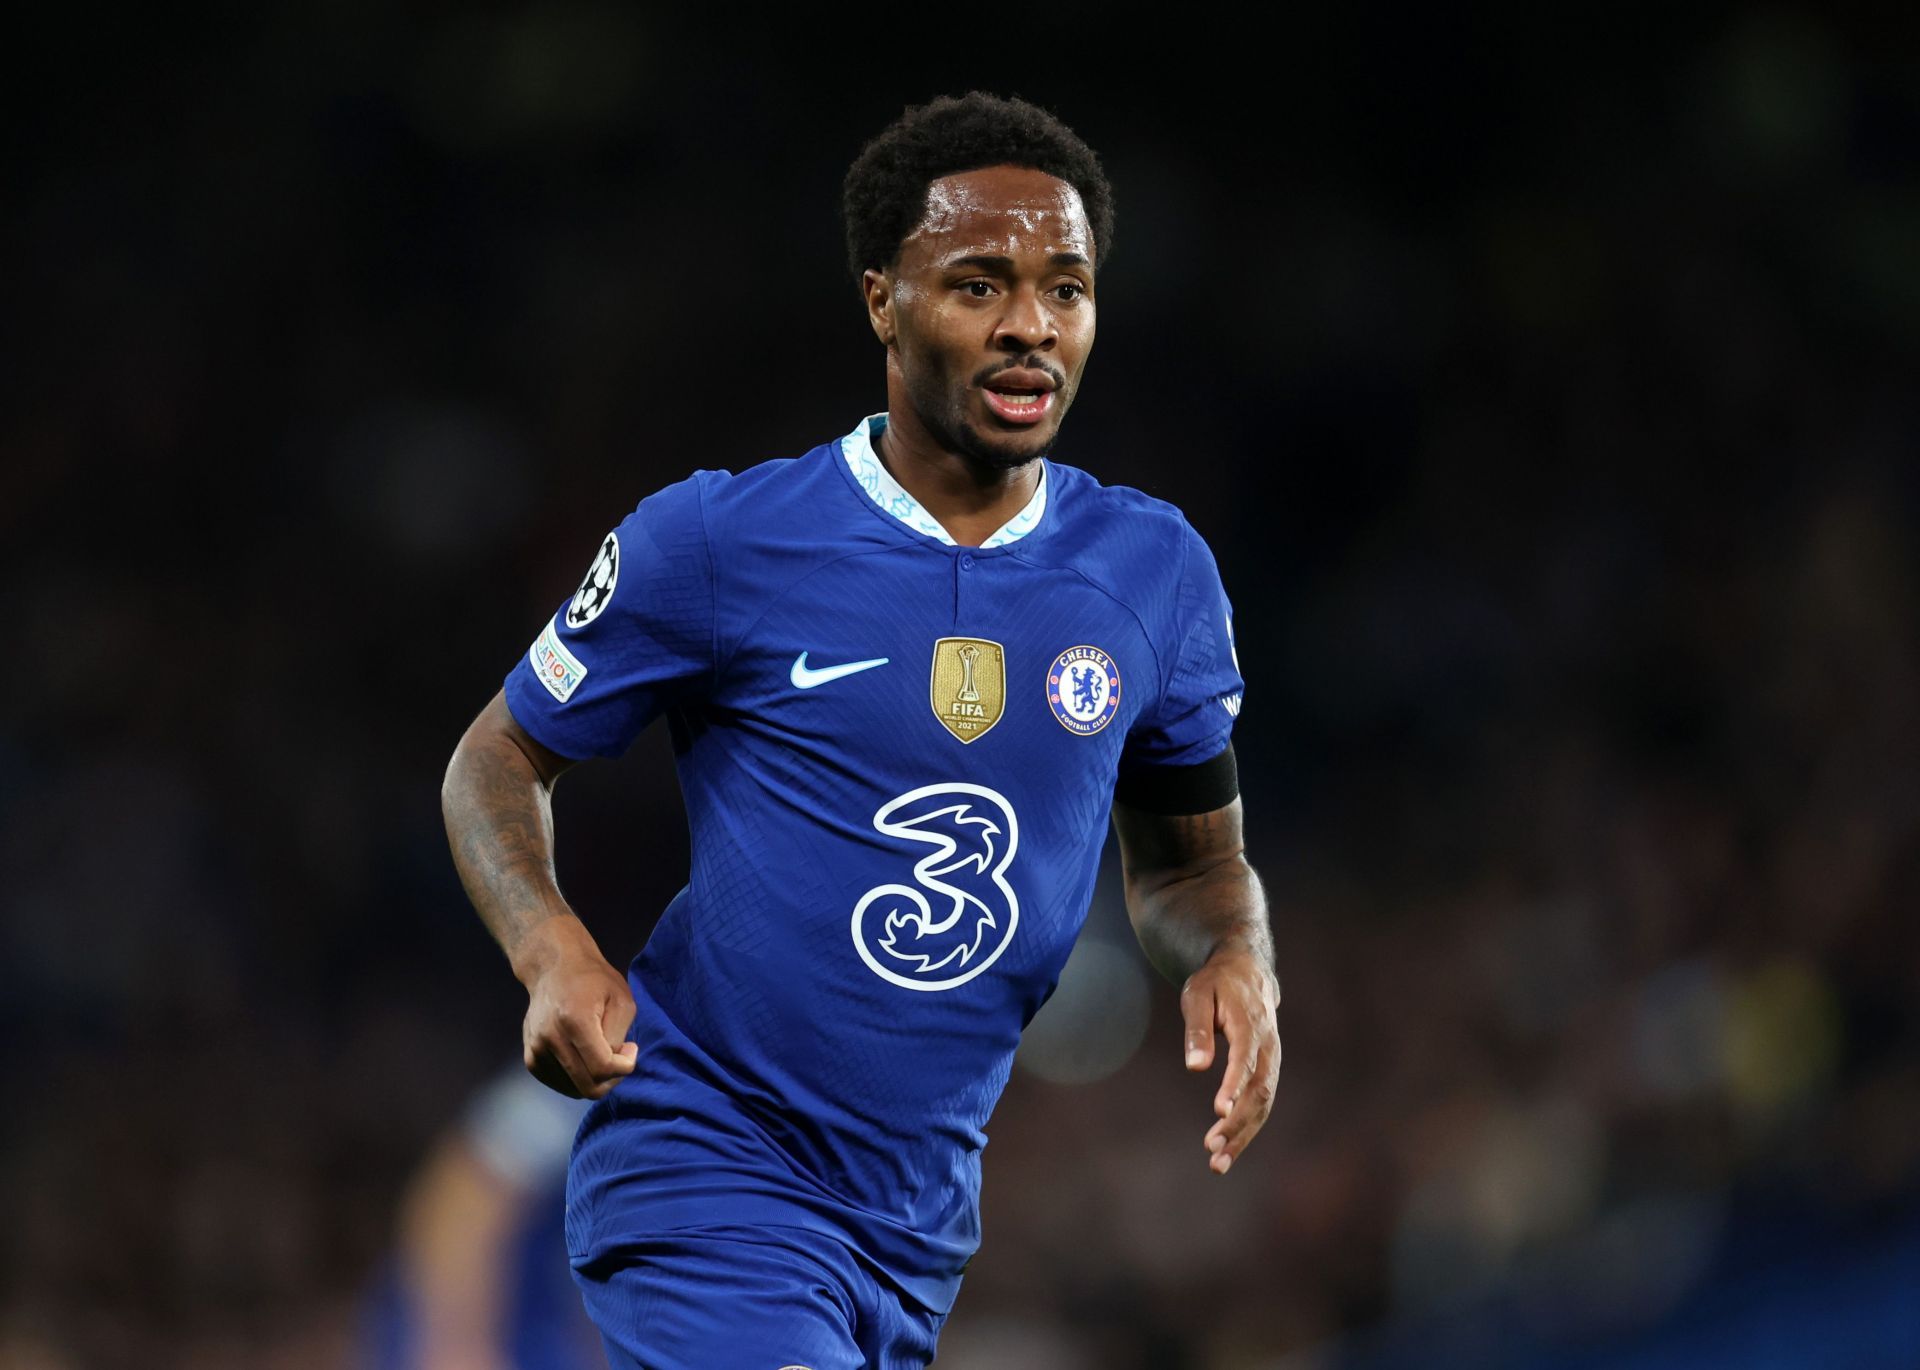 Sterling has six-goal contributions for Chelsea this season